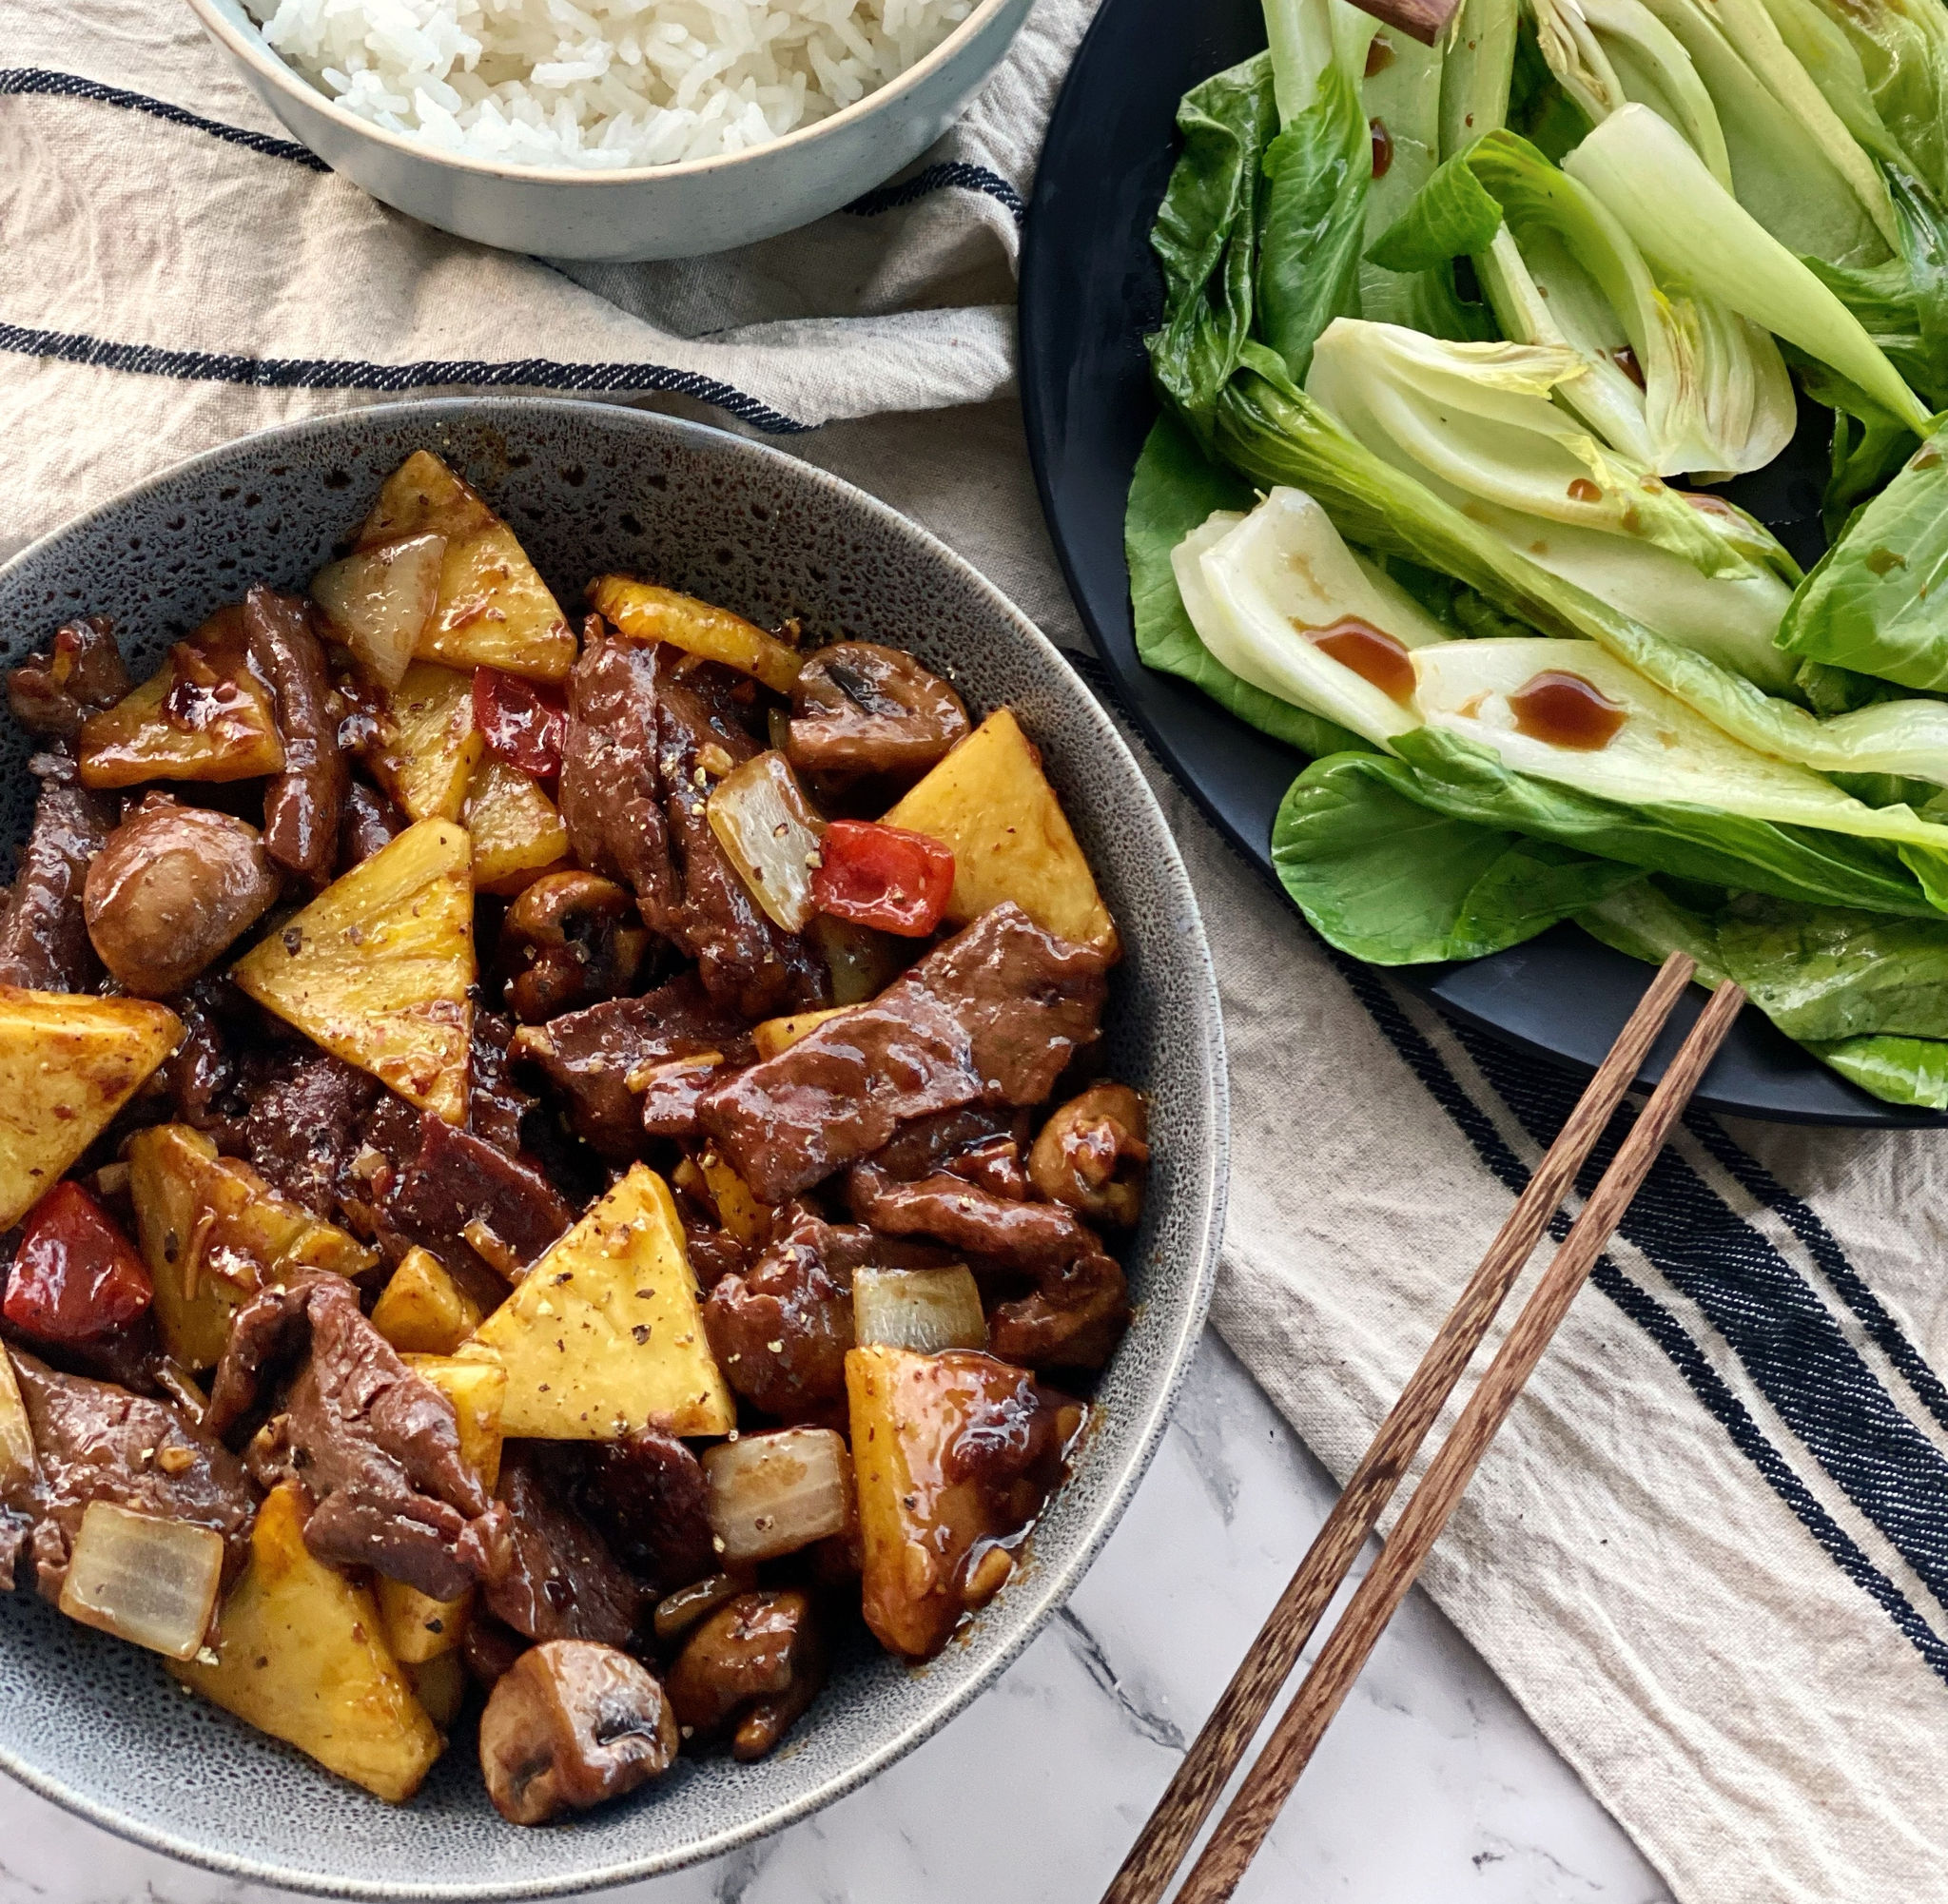 Beef Eye Fillet Stir-Fried with Pineapple, Mushrooms, and Cherry Bell Pepper